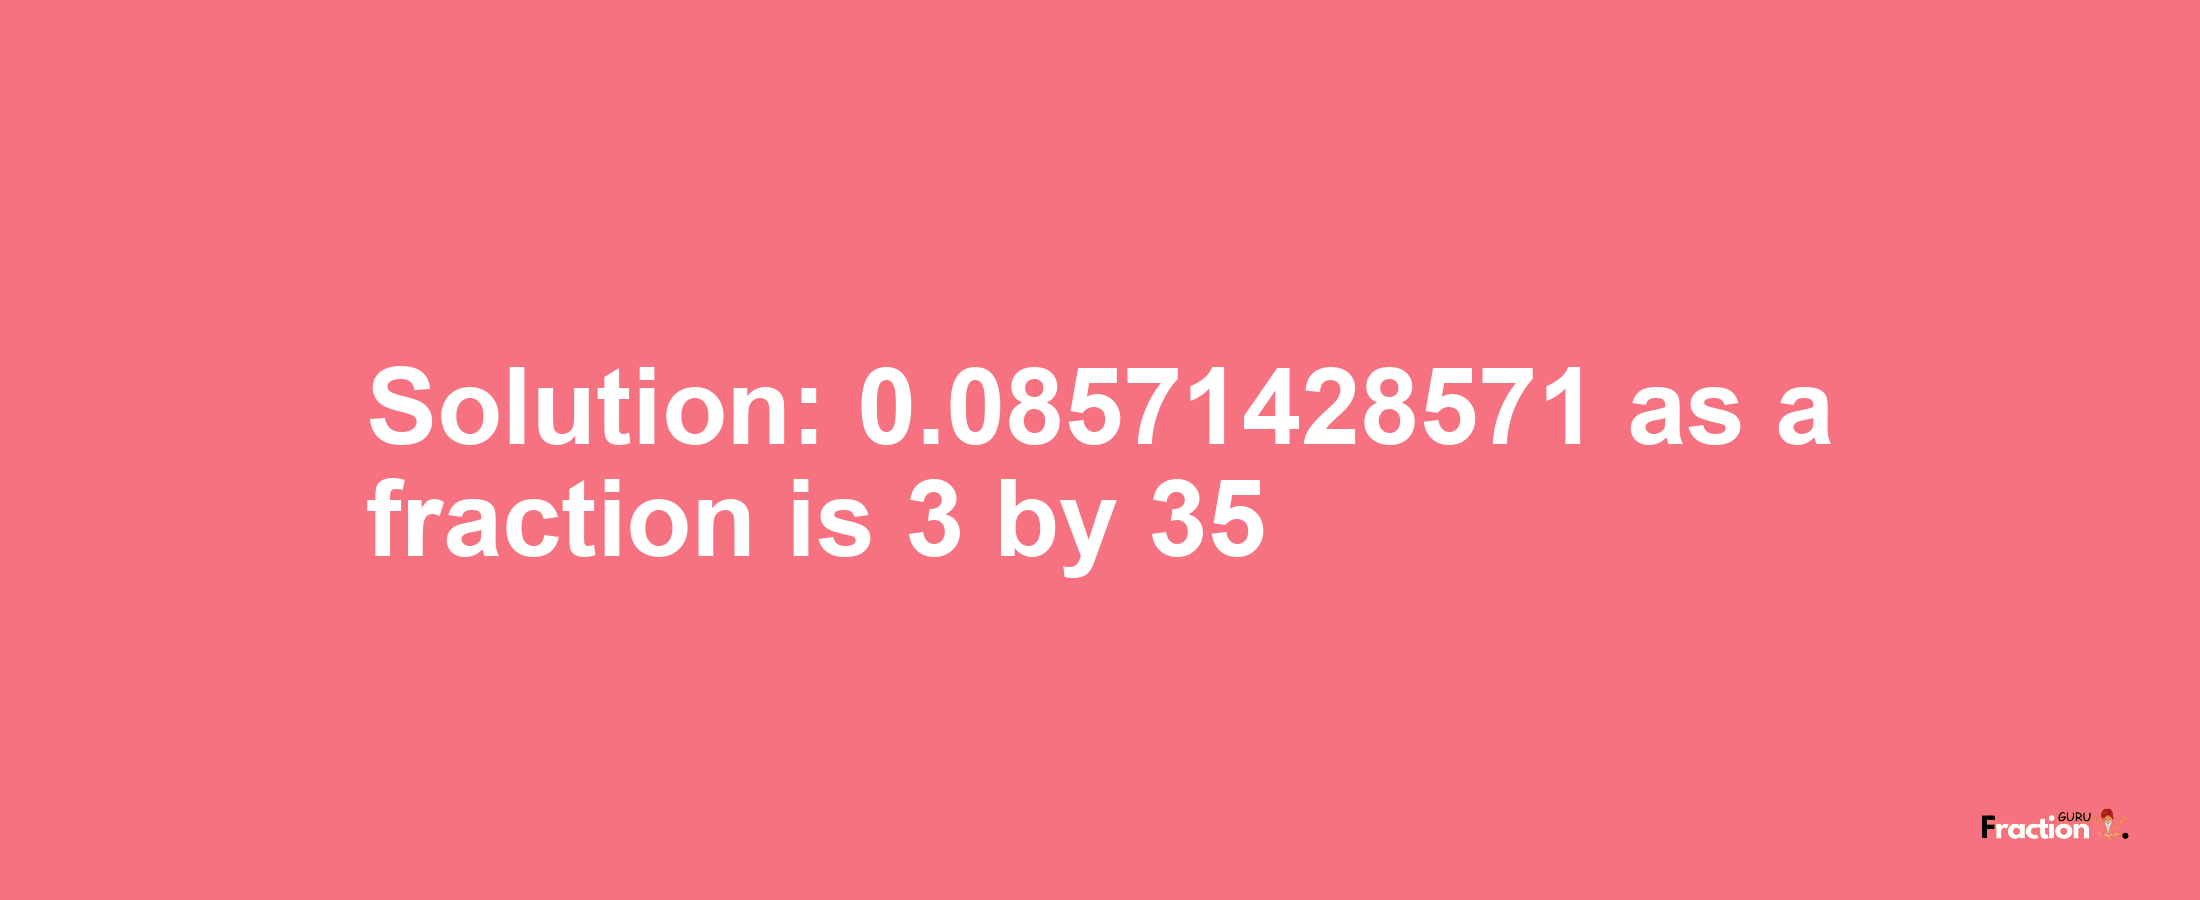 Solution:0.08571428571 as a fraction is 3/35